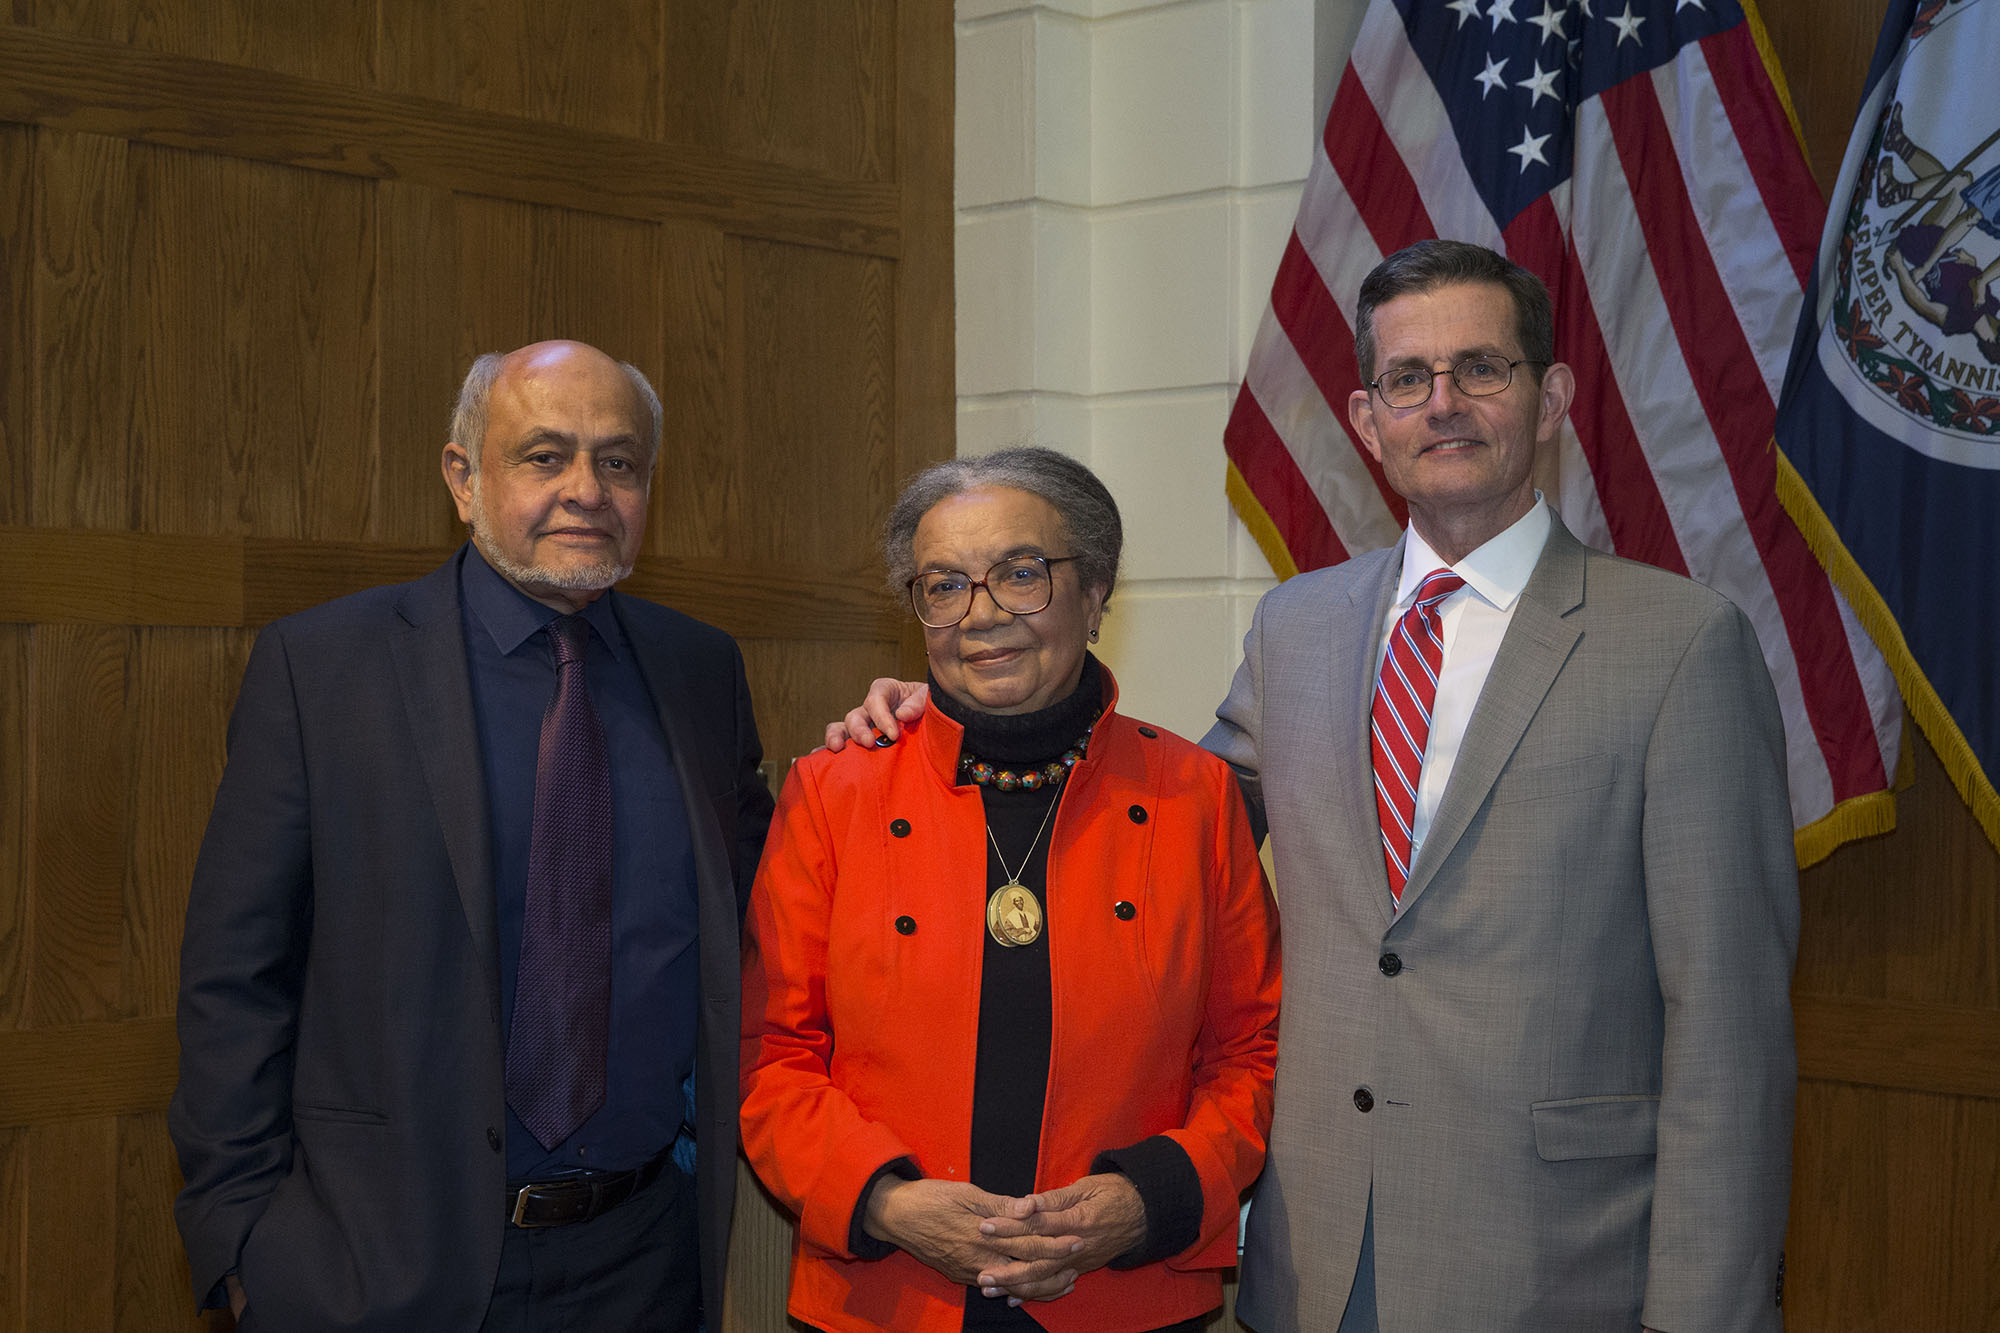 Group photo From left, Cecil Balmond, Marian Wright Edelman and John Gleeson